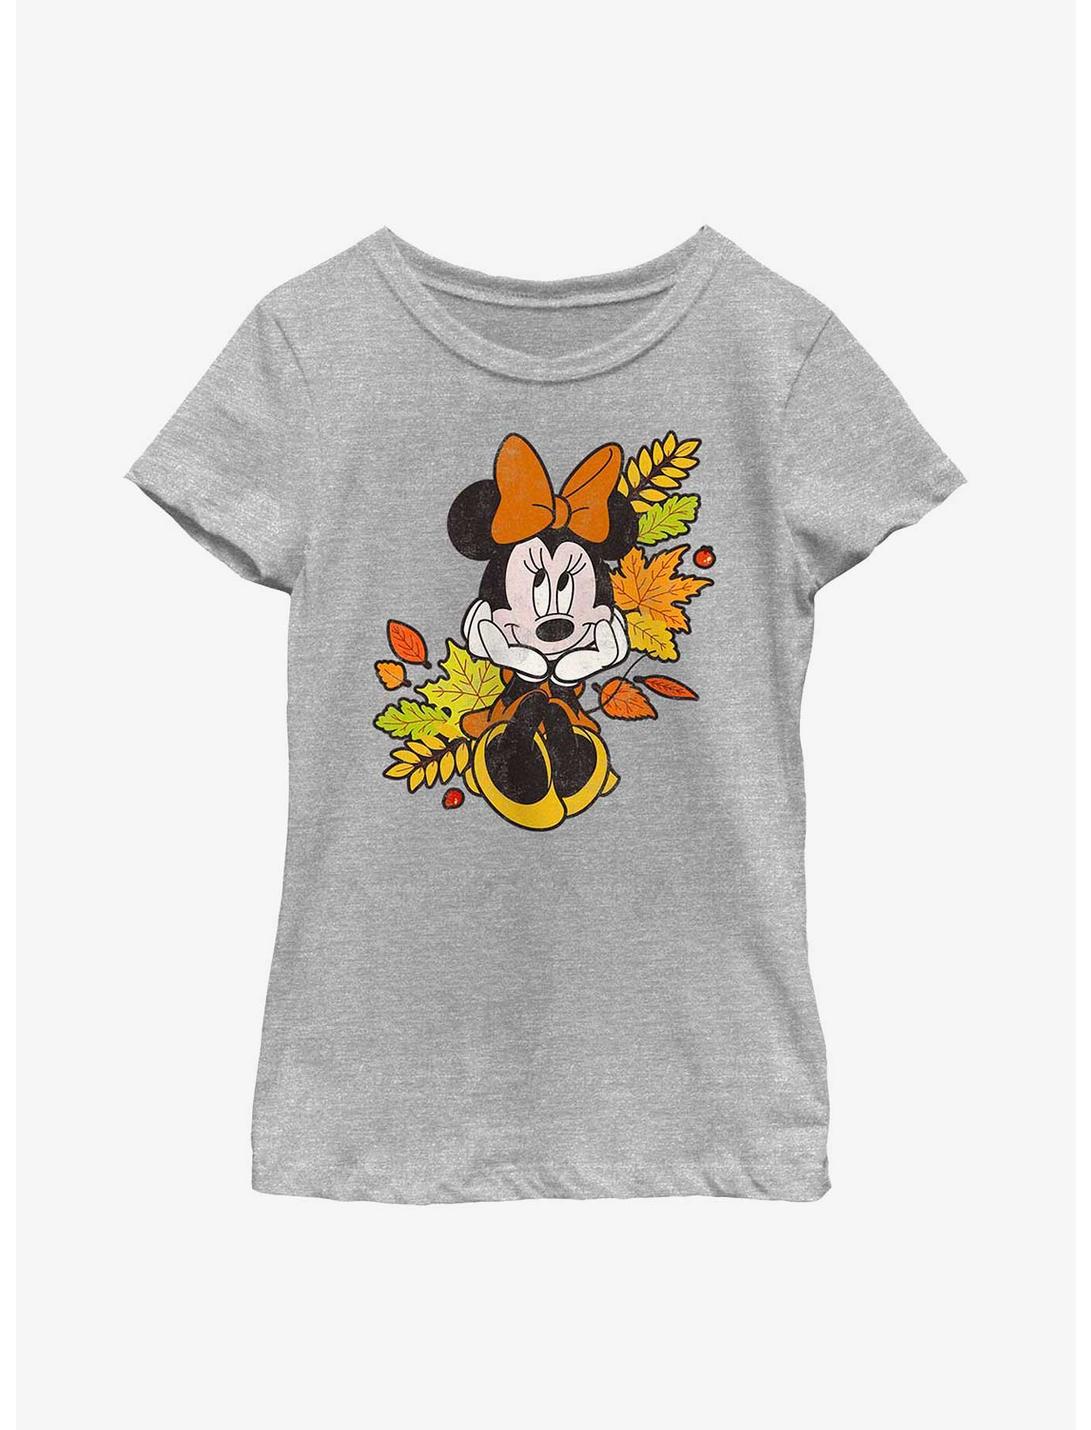 Disney Minnie Mouse Minnie Fall Leaves Youth Girls T-Shirt, ATH HTR, hi-res